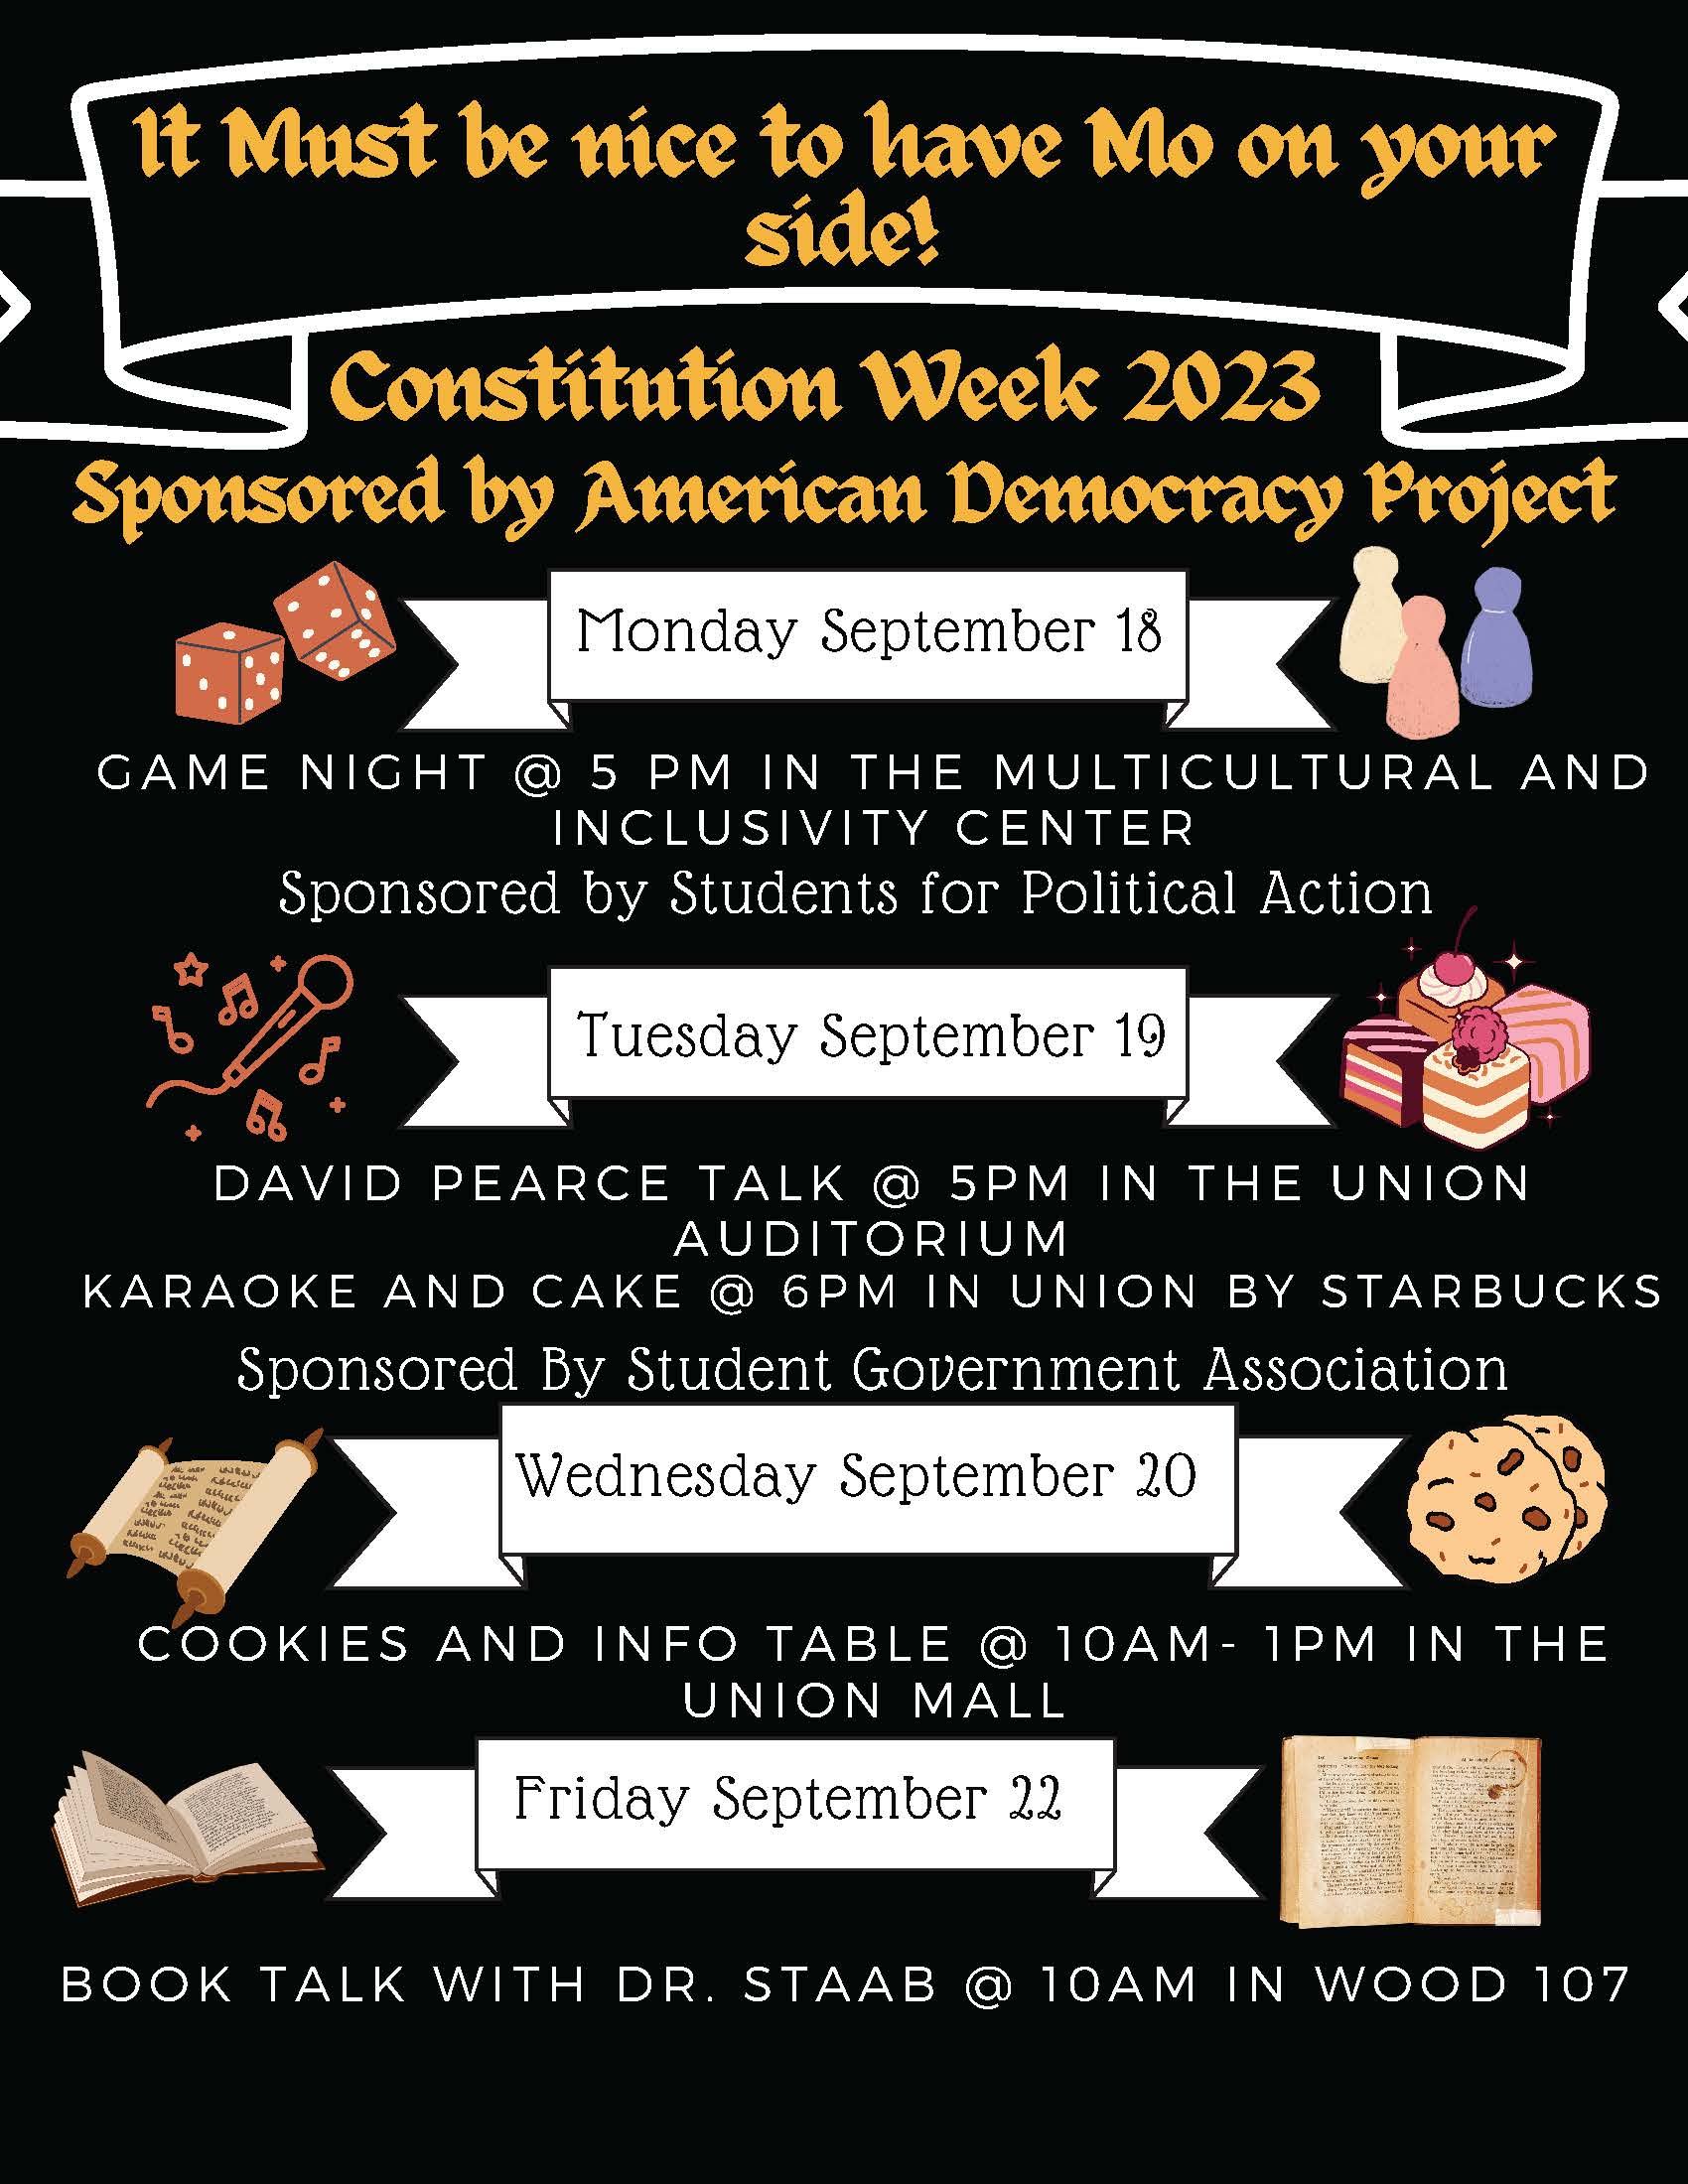 Fall 2023 ADP Constitution Week Flyer